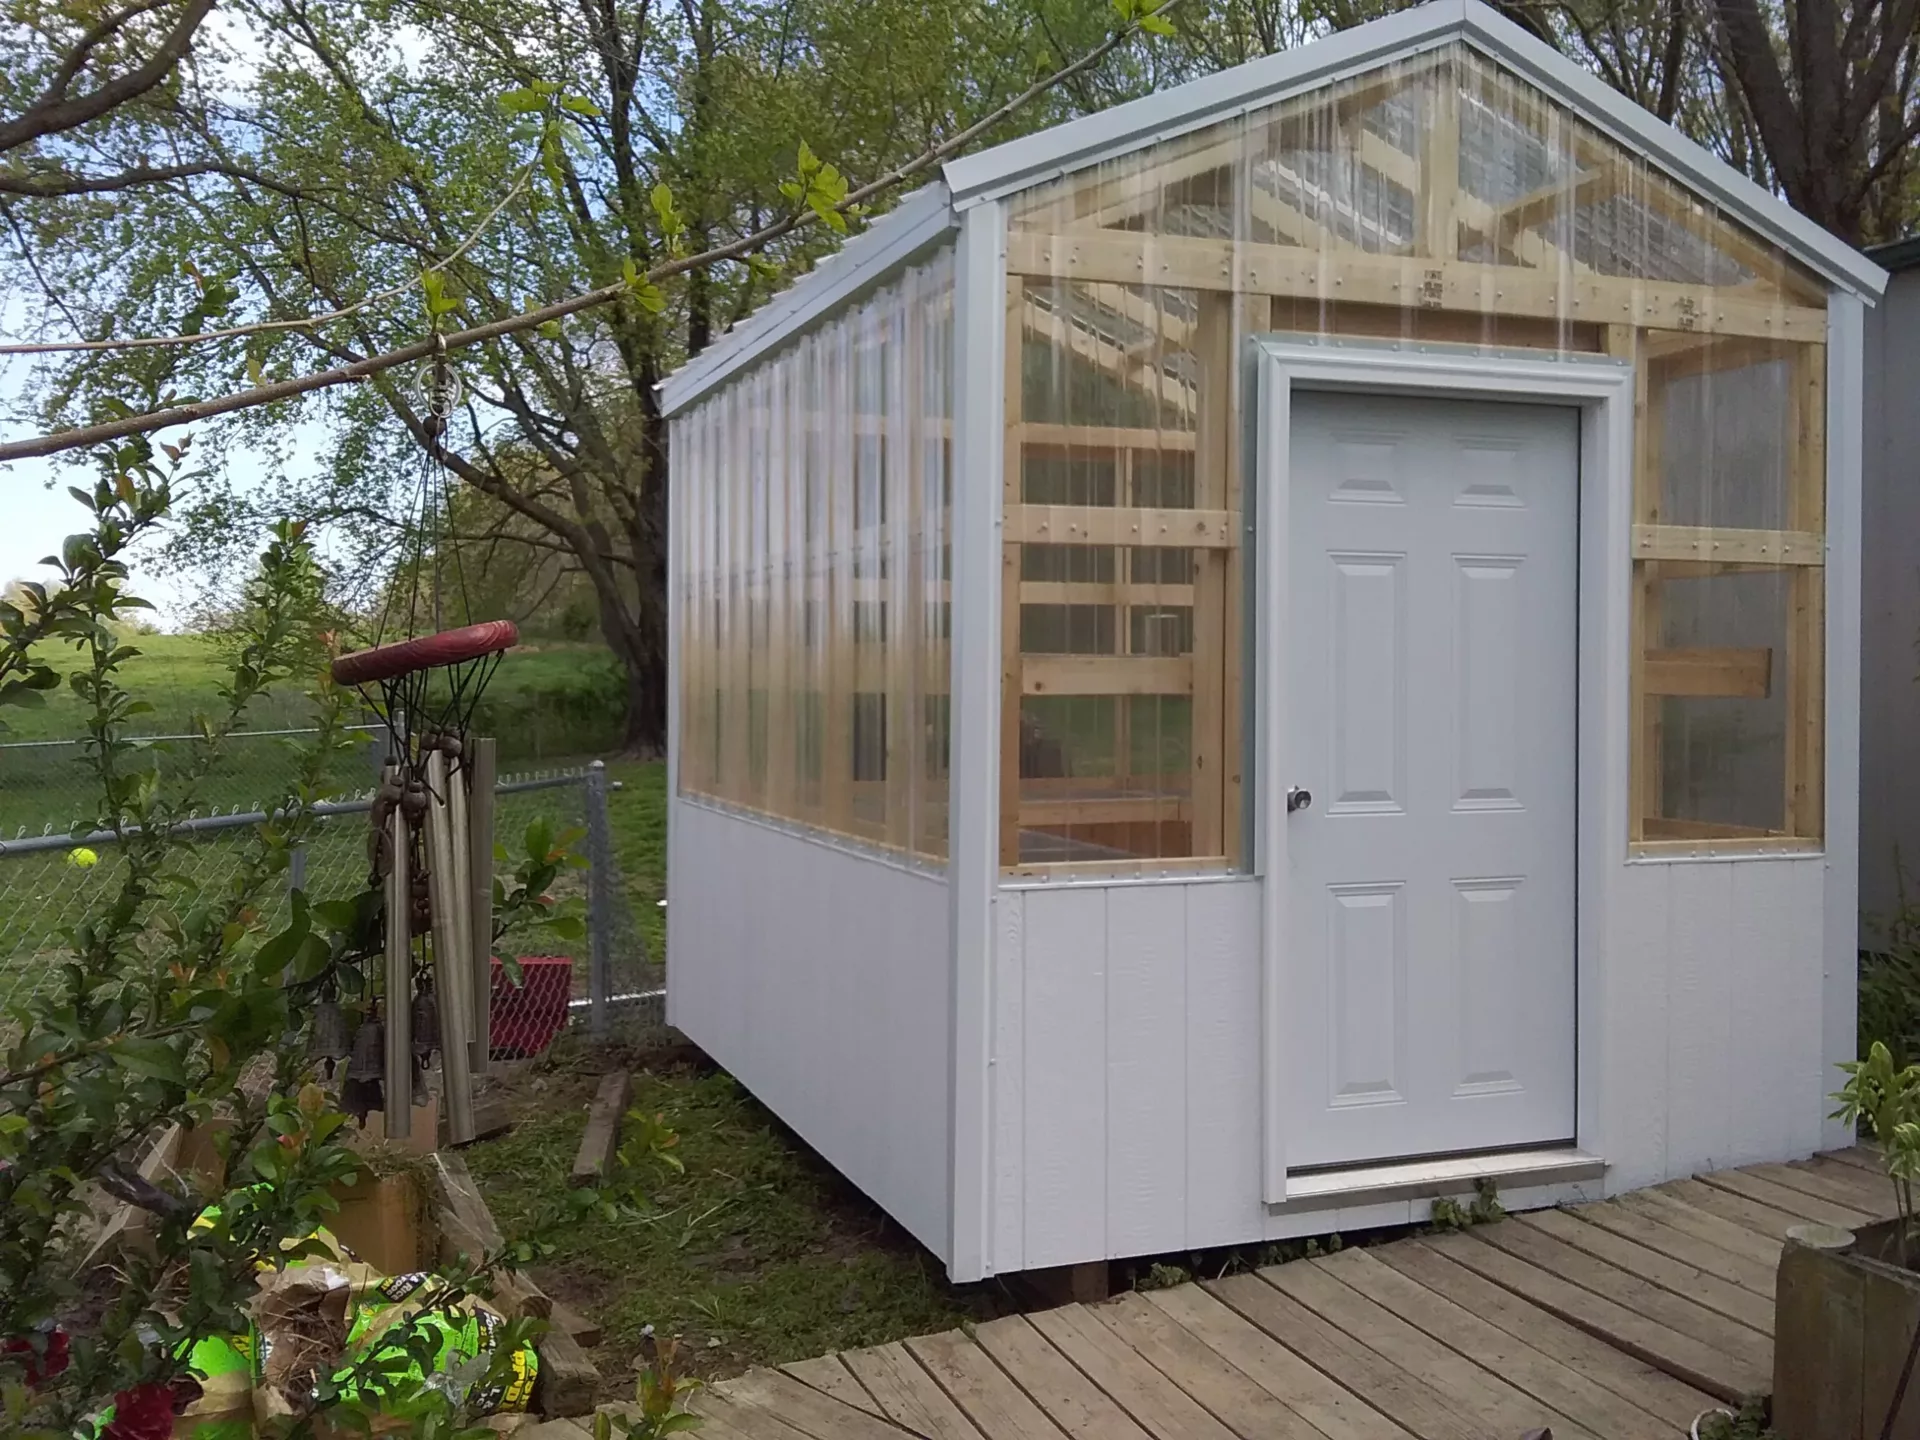 Powerful Portable Greenhouses: Unleash Your Green Thumb with this awesome greenhouse